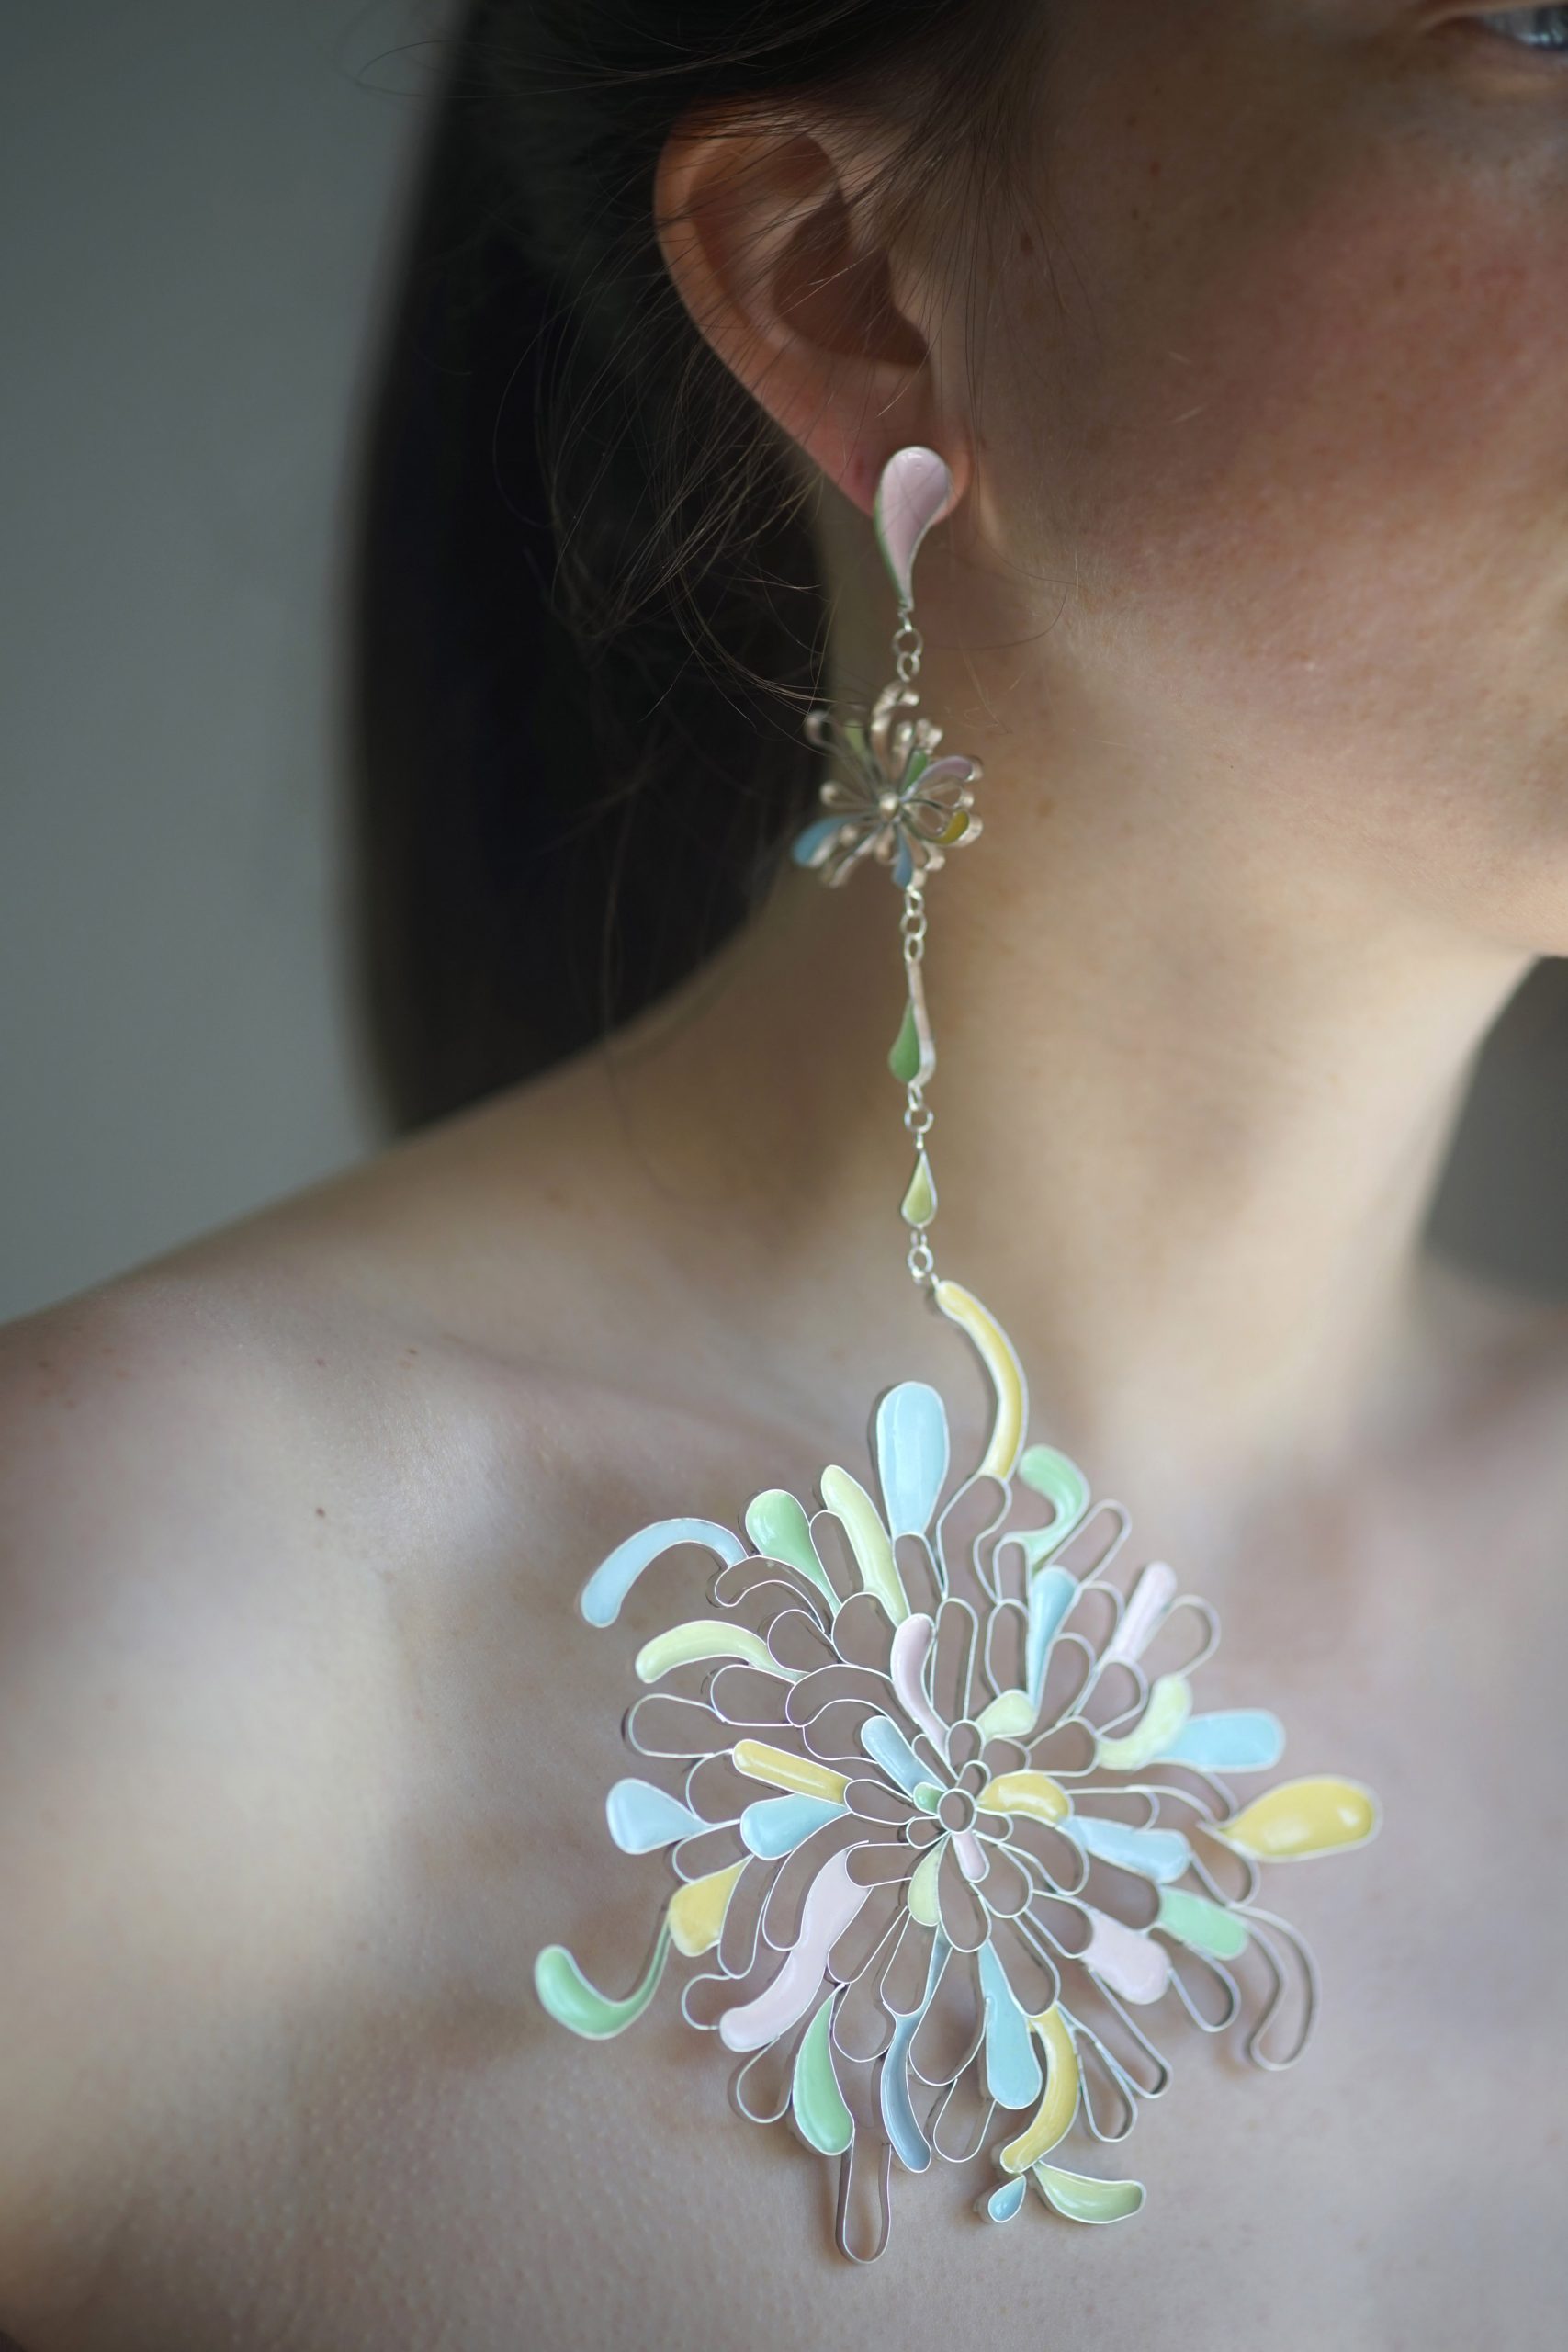 Jewellery designs from New Designers showcase question gender roles